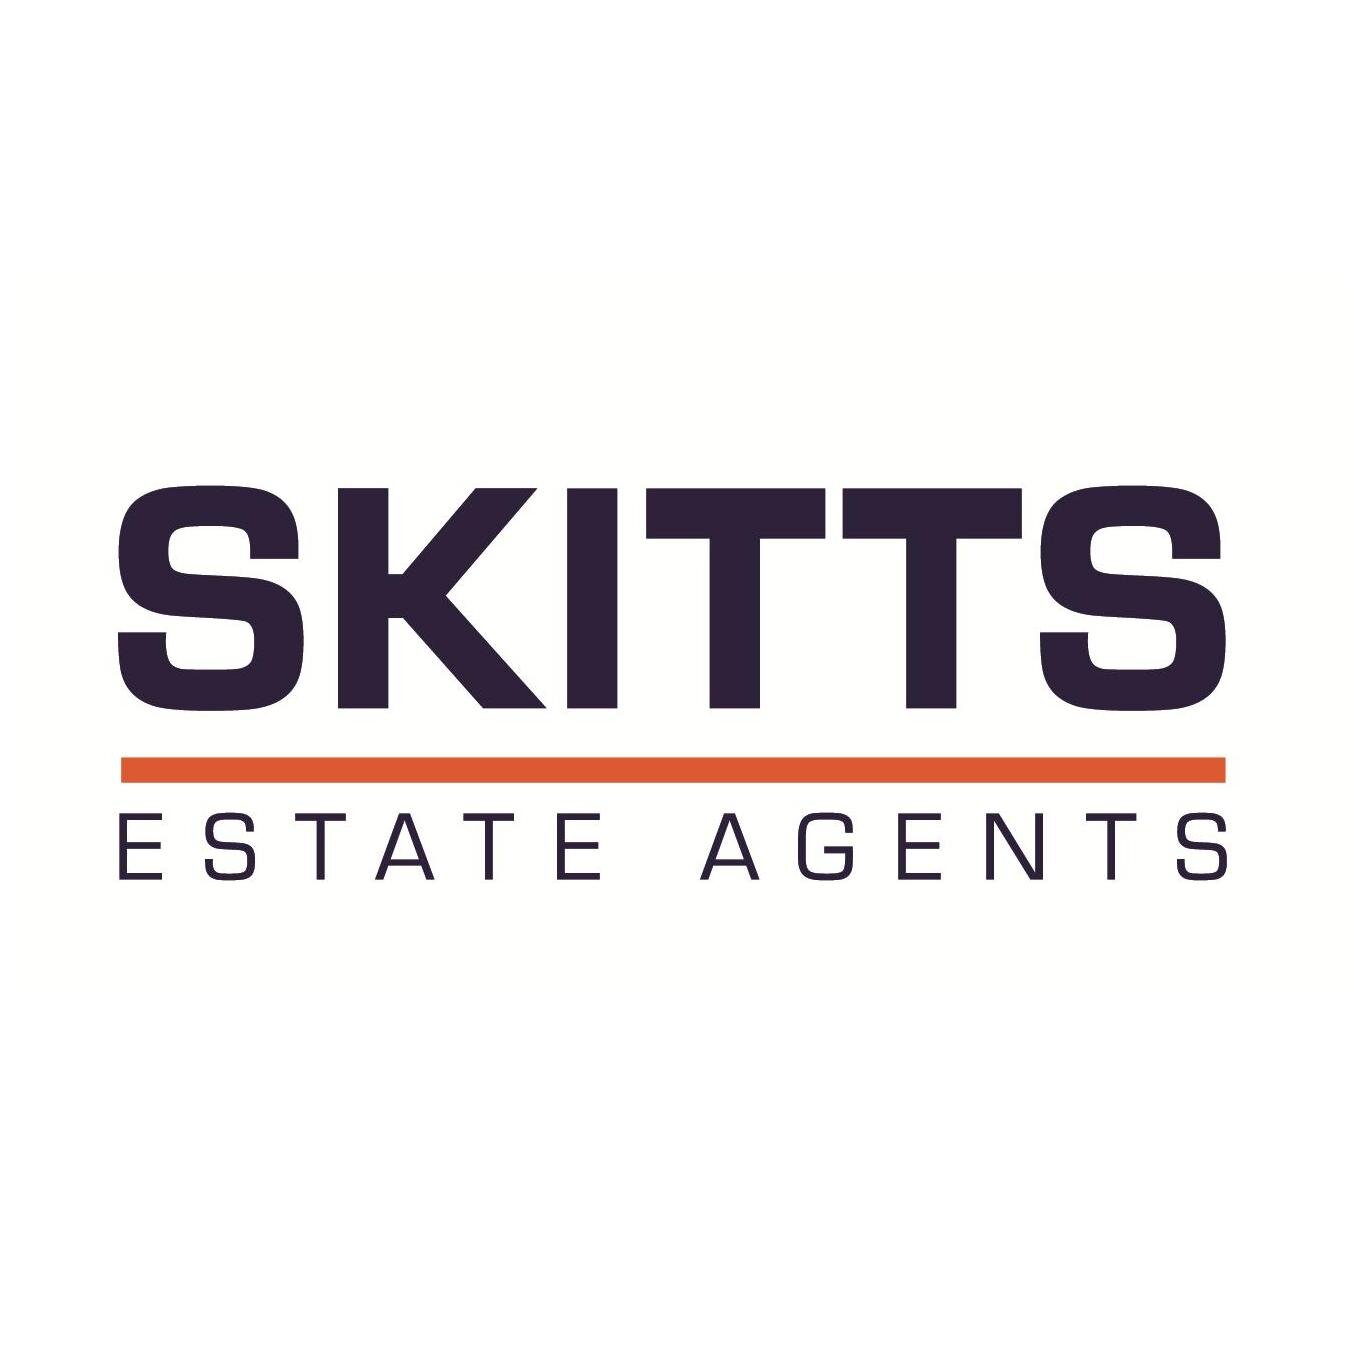 Estate Agents Selling and Letting Homes in the West Midlands.Offering Comprehensive Sales Packages including Auction & Conveyancing https://t.co/nNLZ3JrxXl